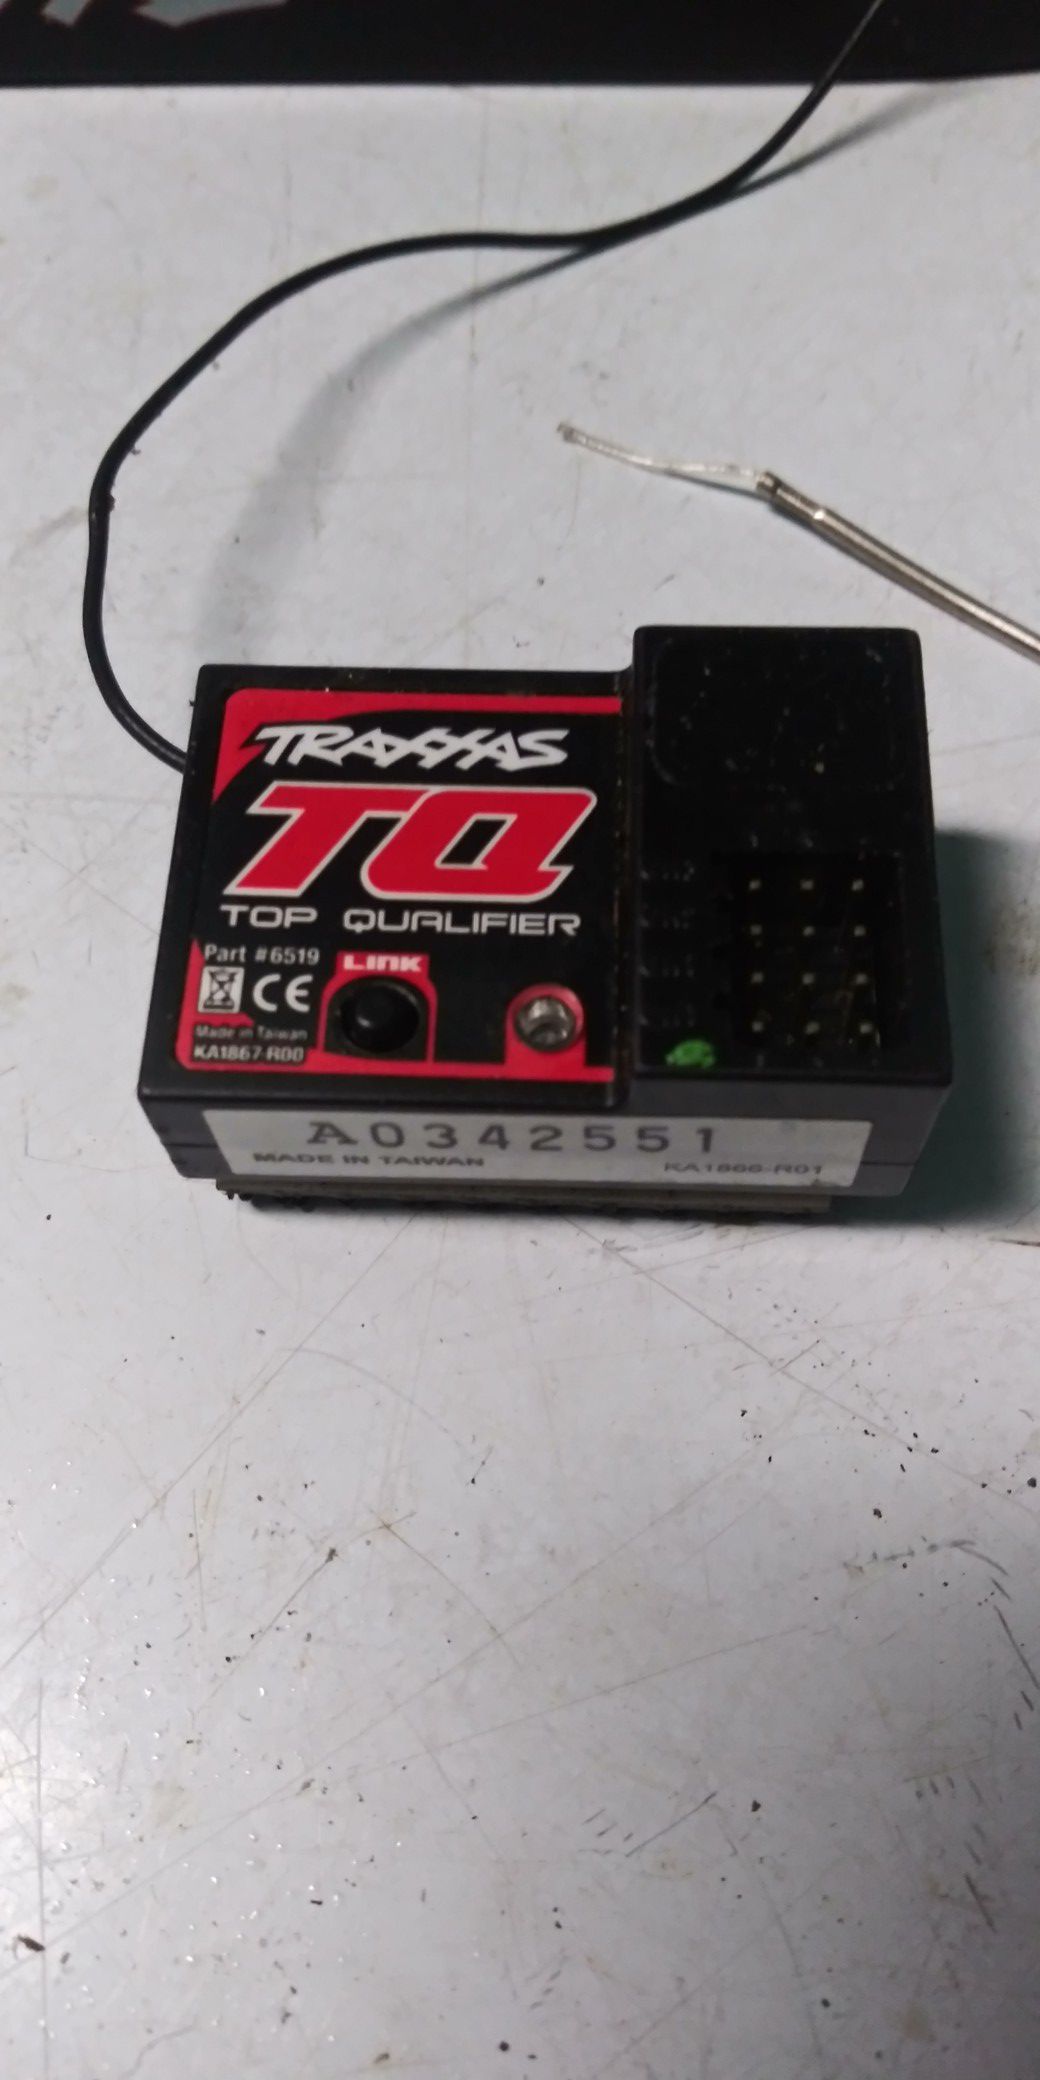 Traxxas control and receiver work perfectly